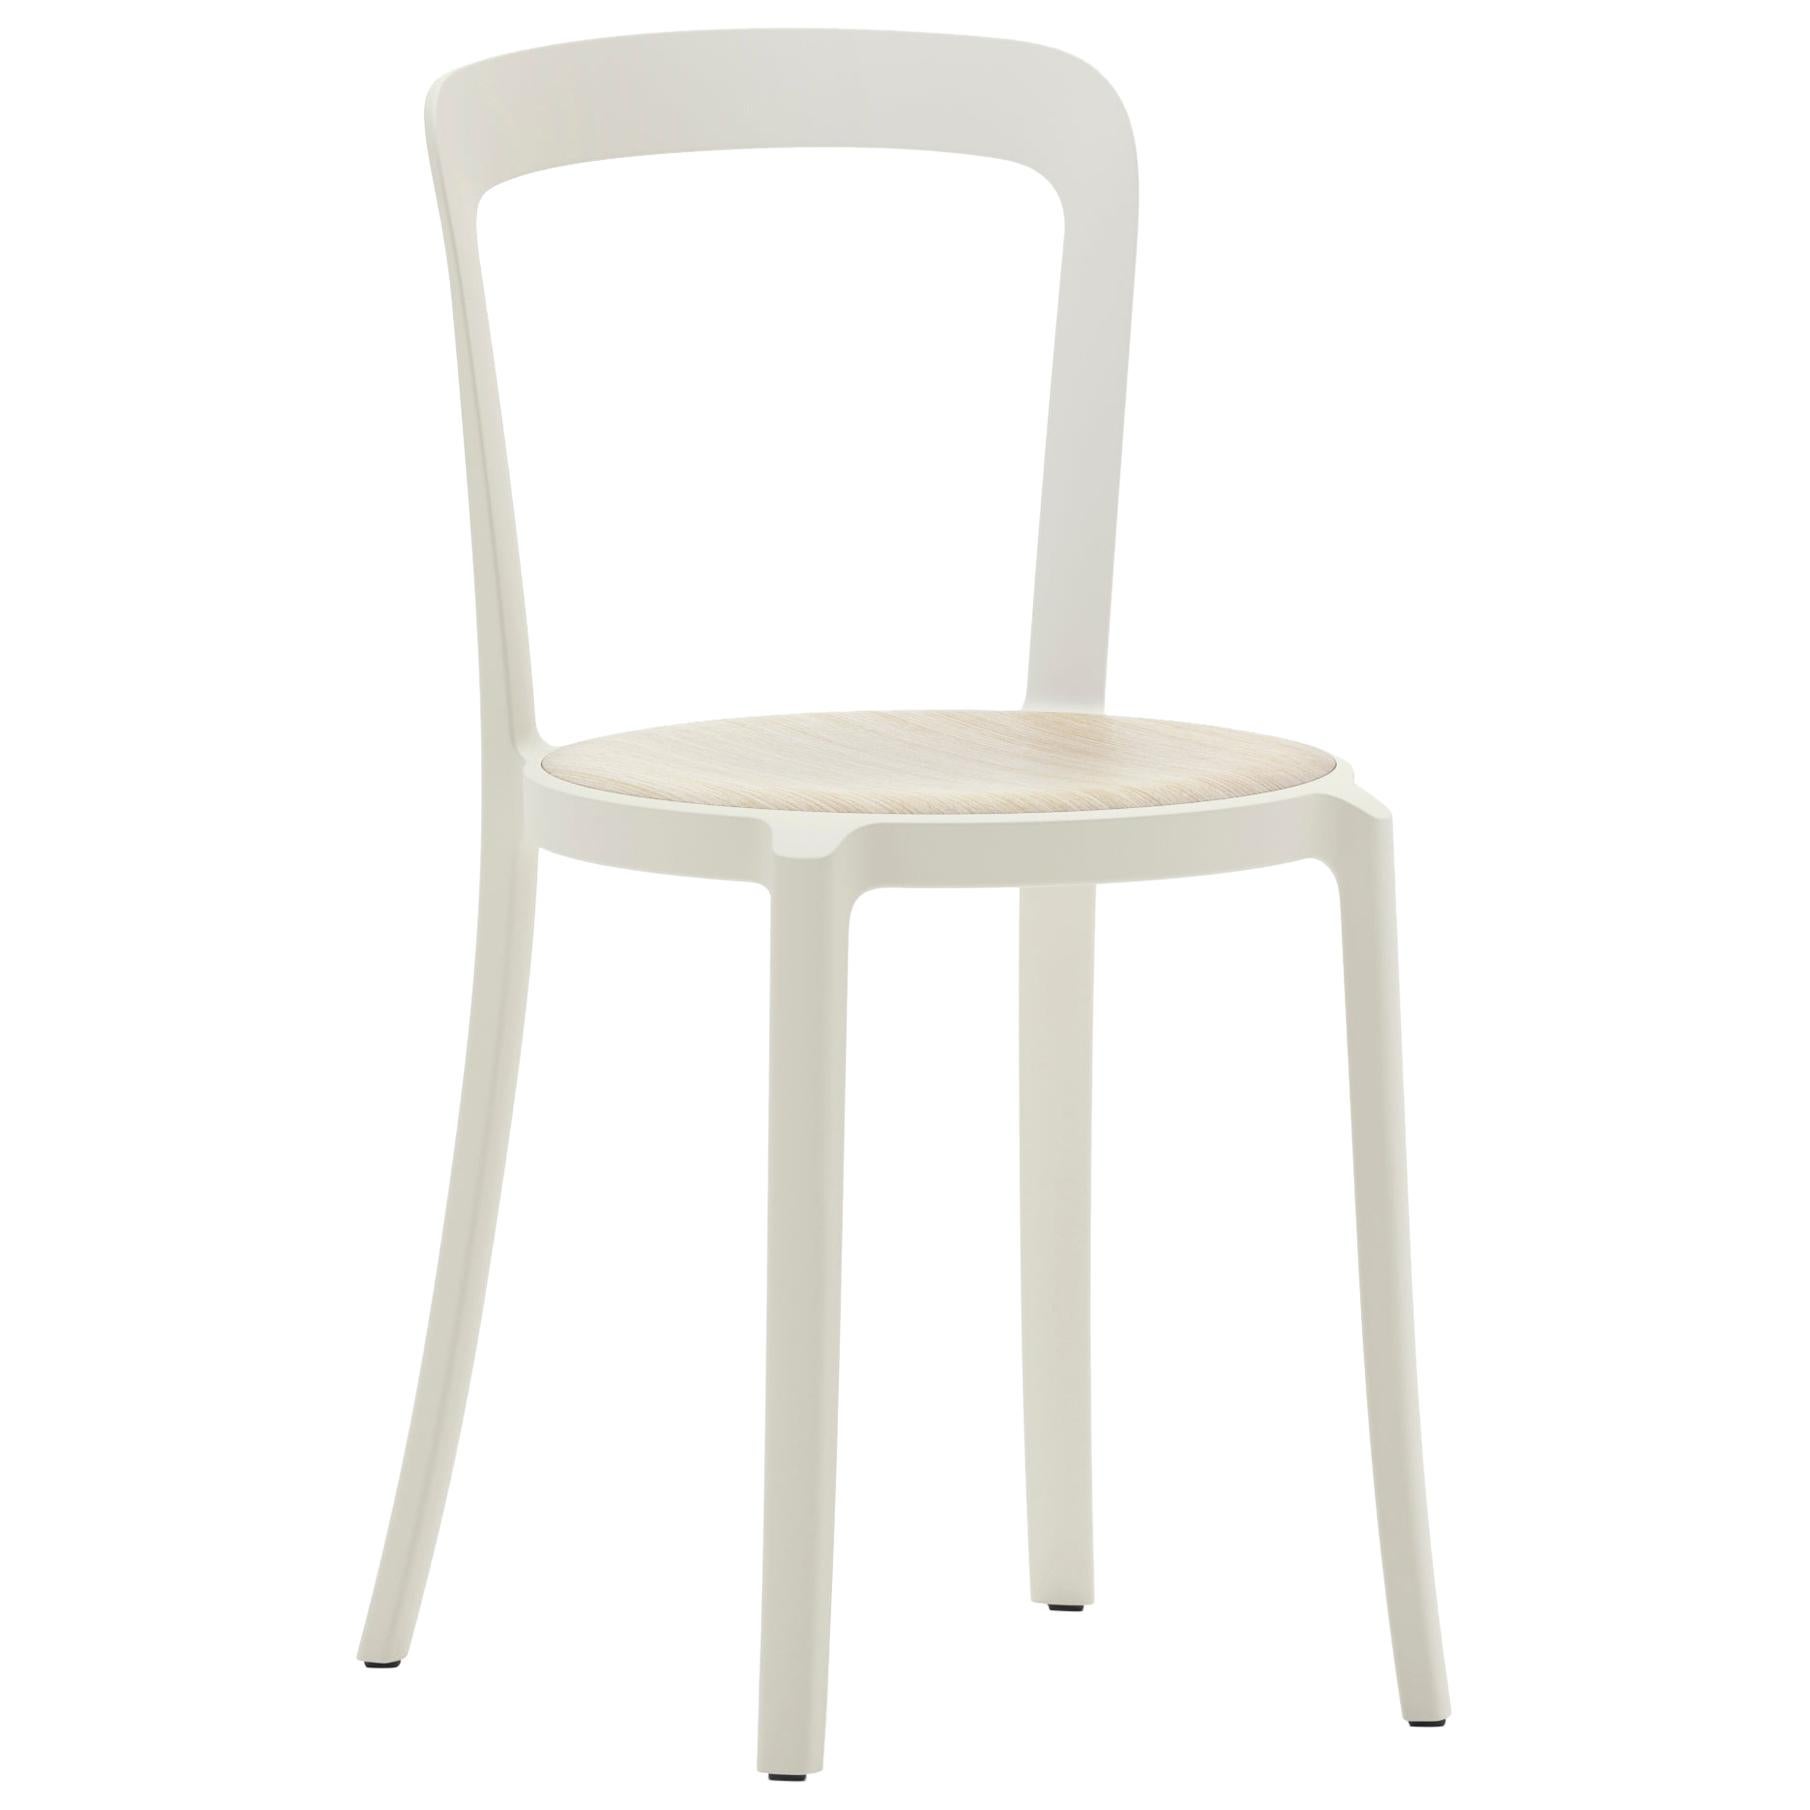 Emeco On & On Stacking Chair in White with Oak Plywood seat by Barber & Osgerby For Sale